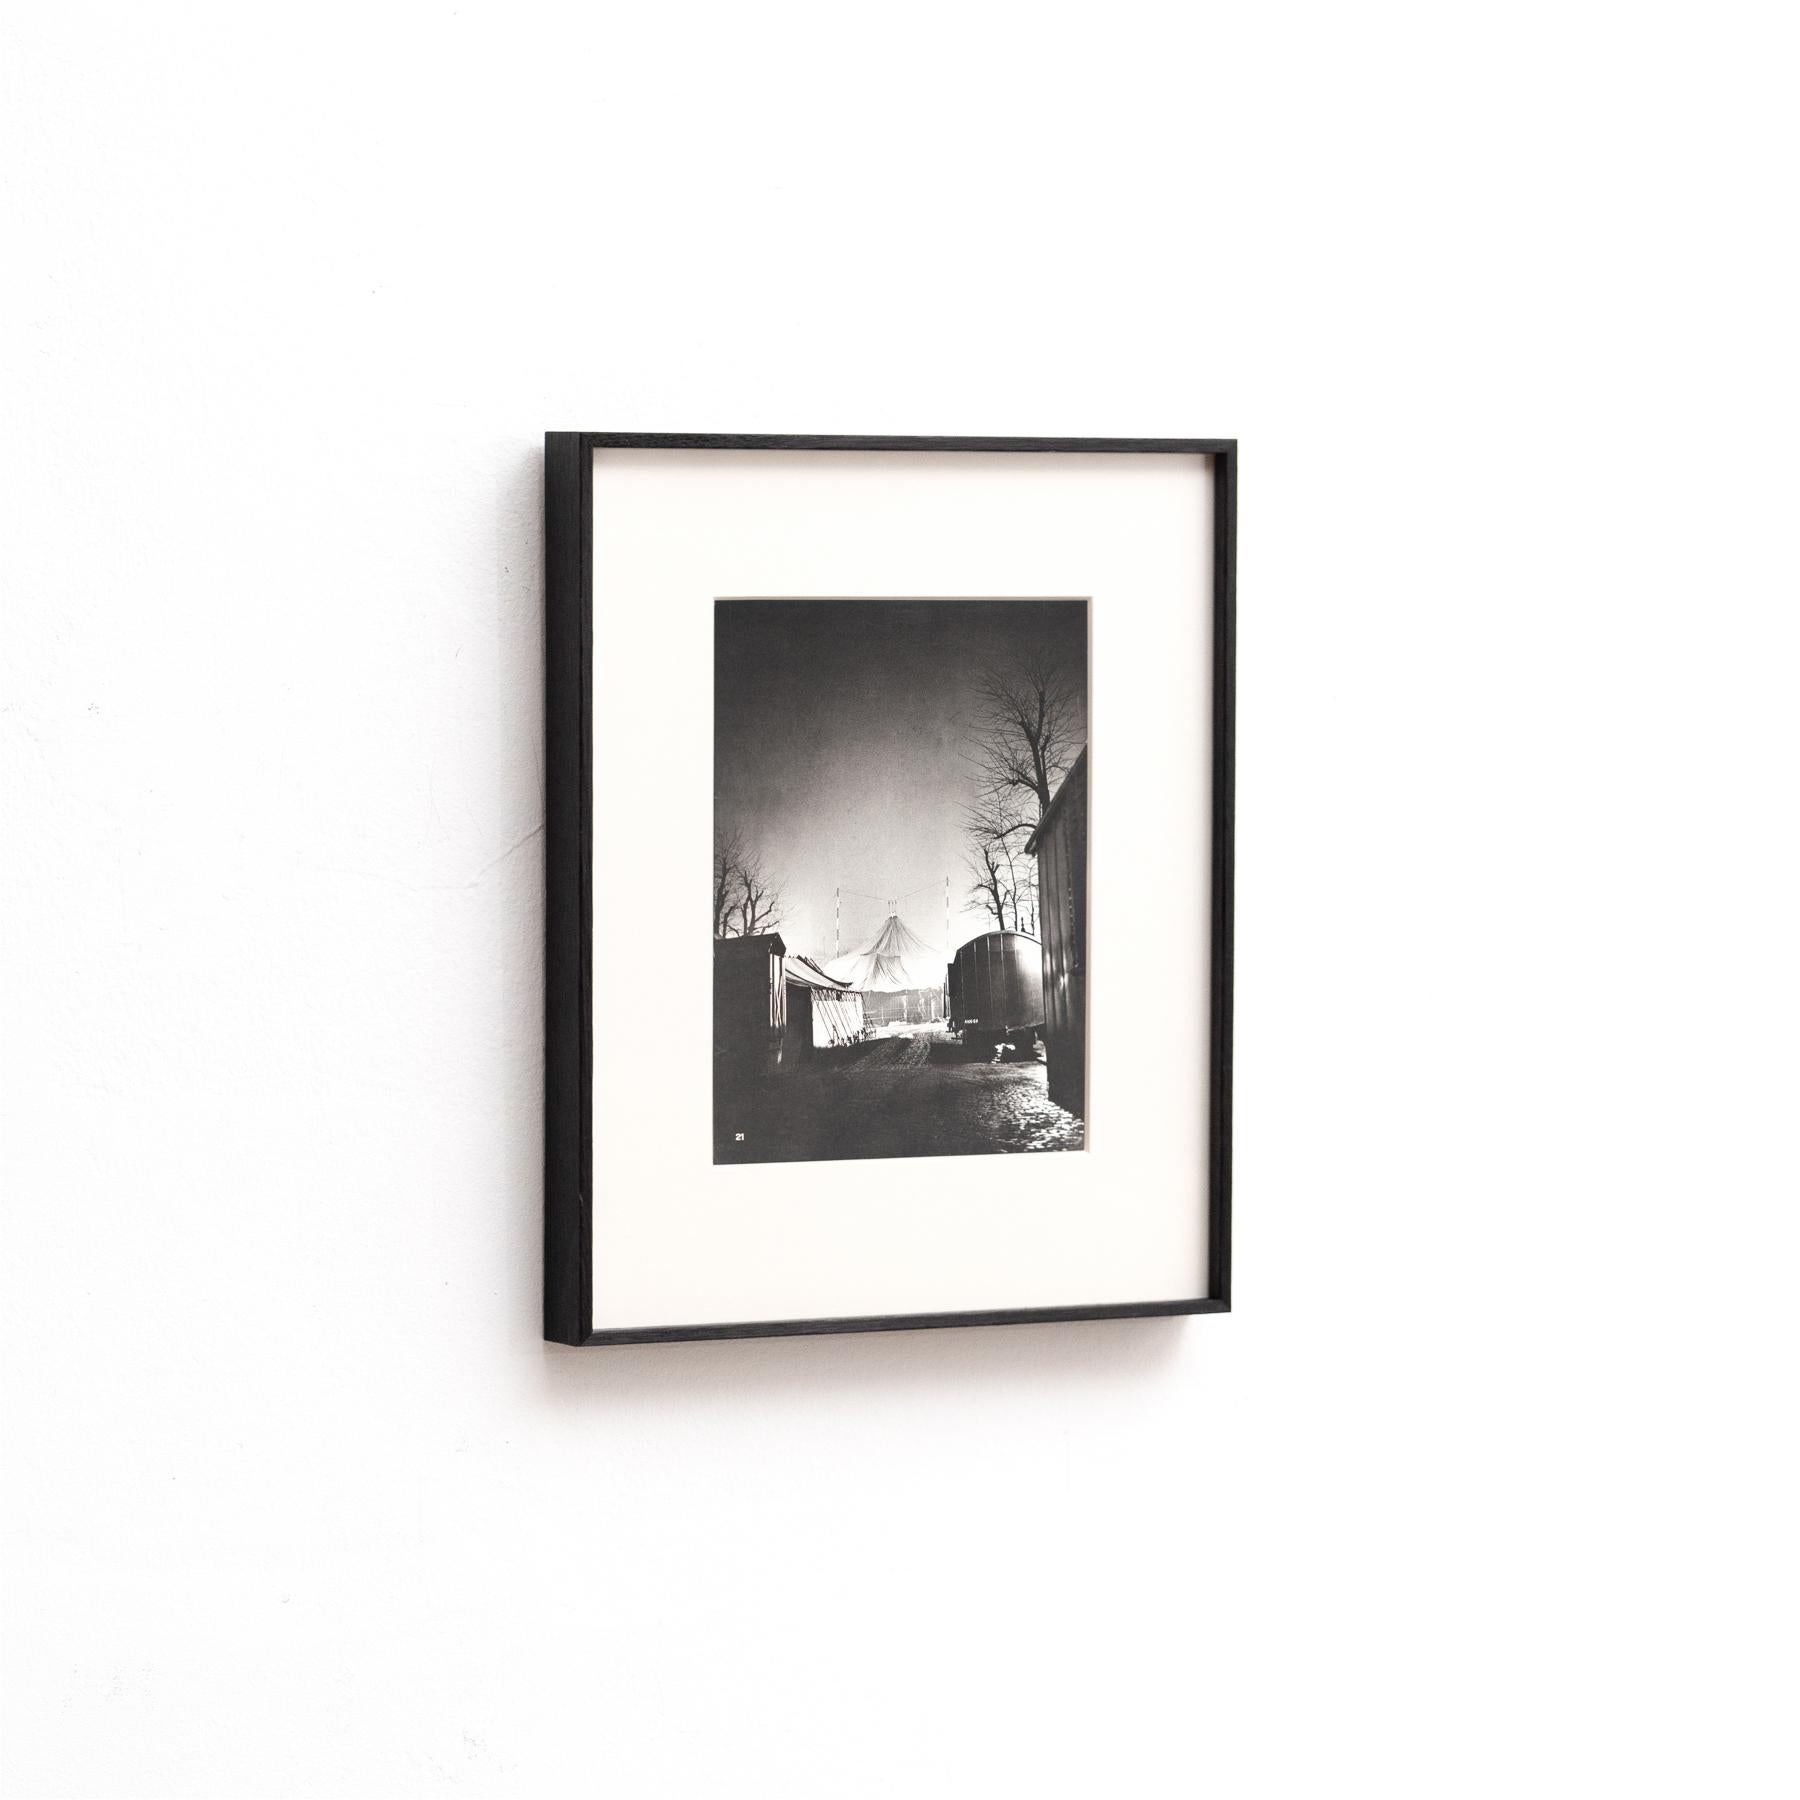 Brassai Rare Black And White Framed Photography, circa 1930 In Good Condition For Sale In Barcelona, Barcelona